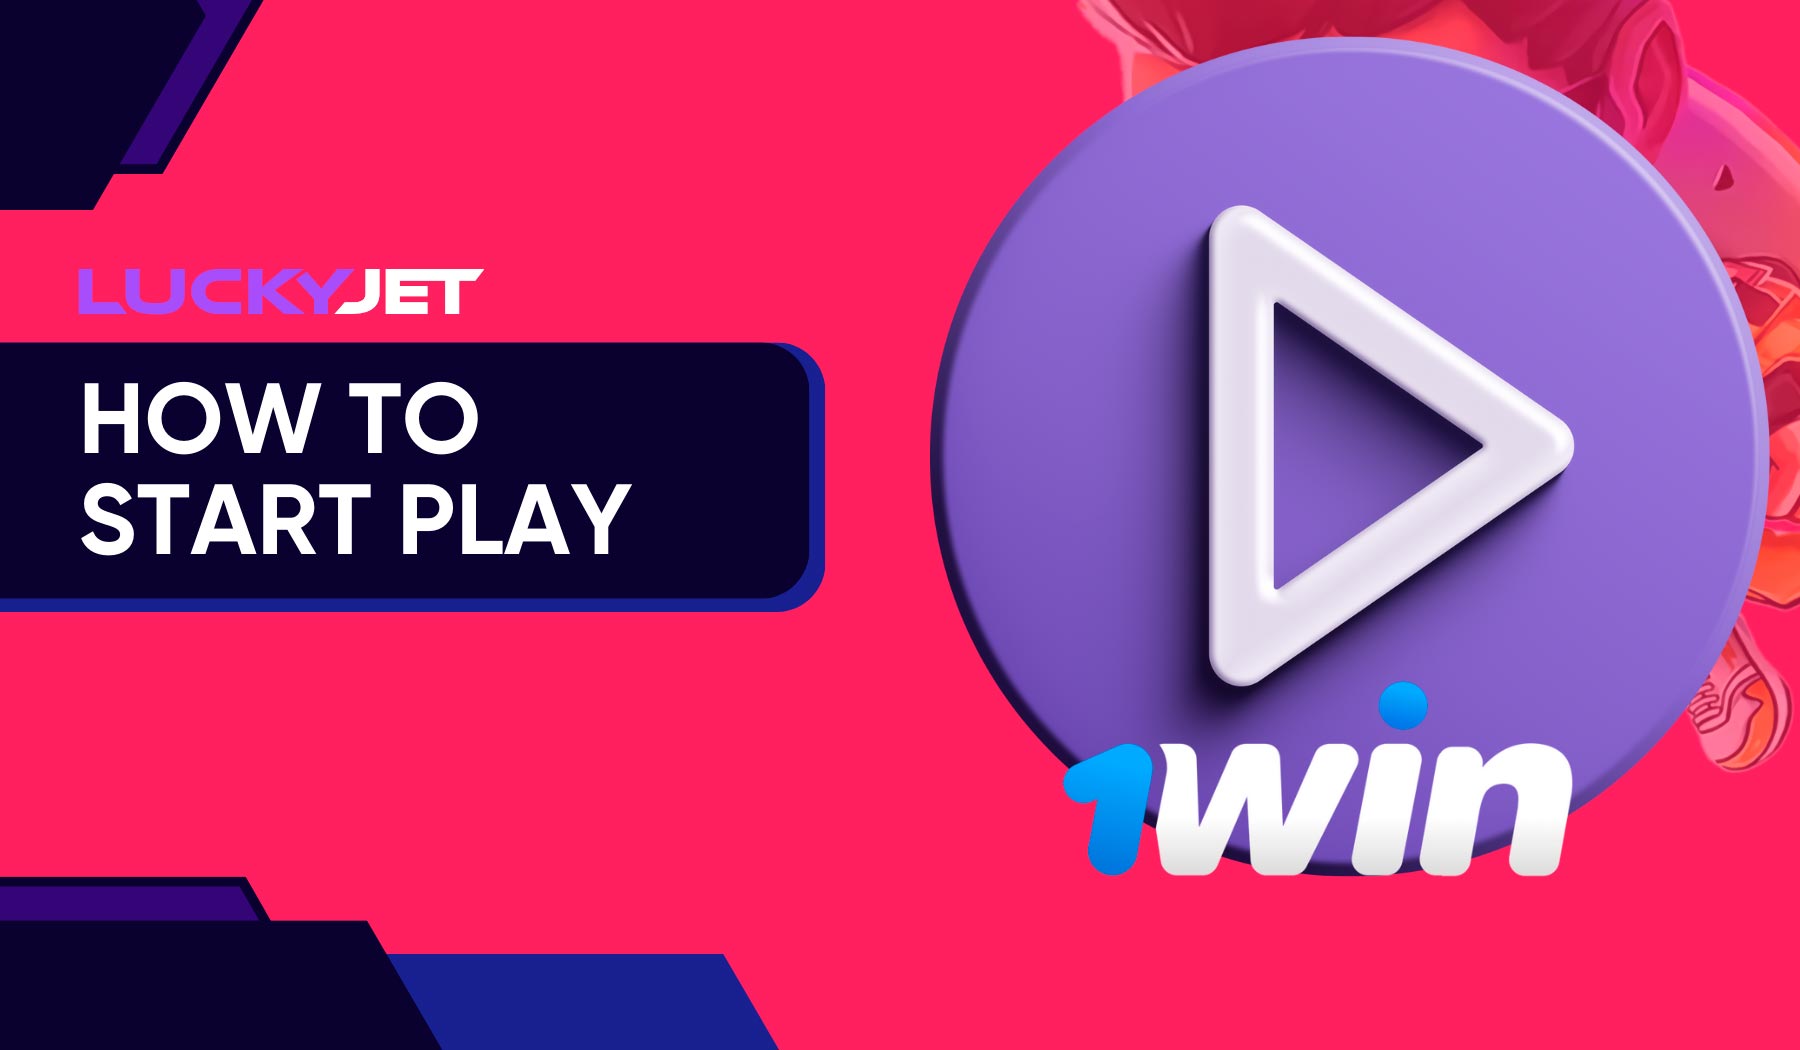 1win Lucky Jet and Enjoy an Exciting Gambling Experience